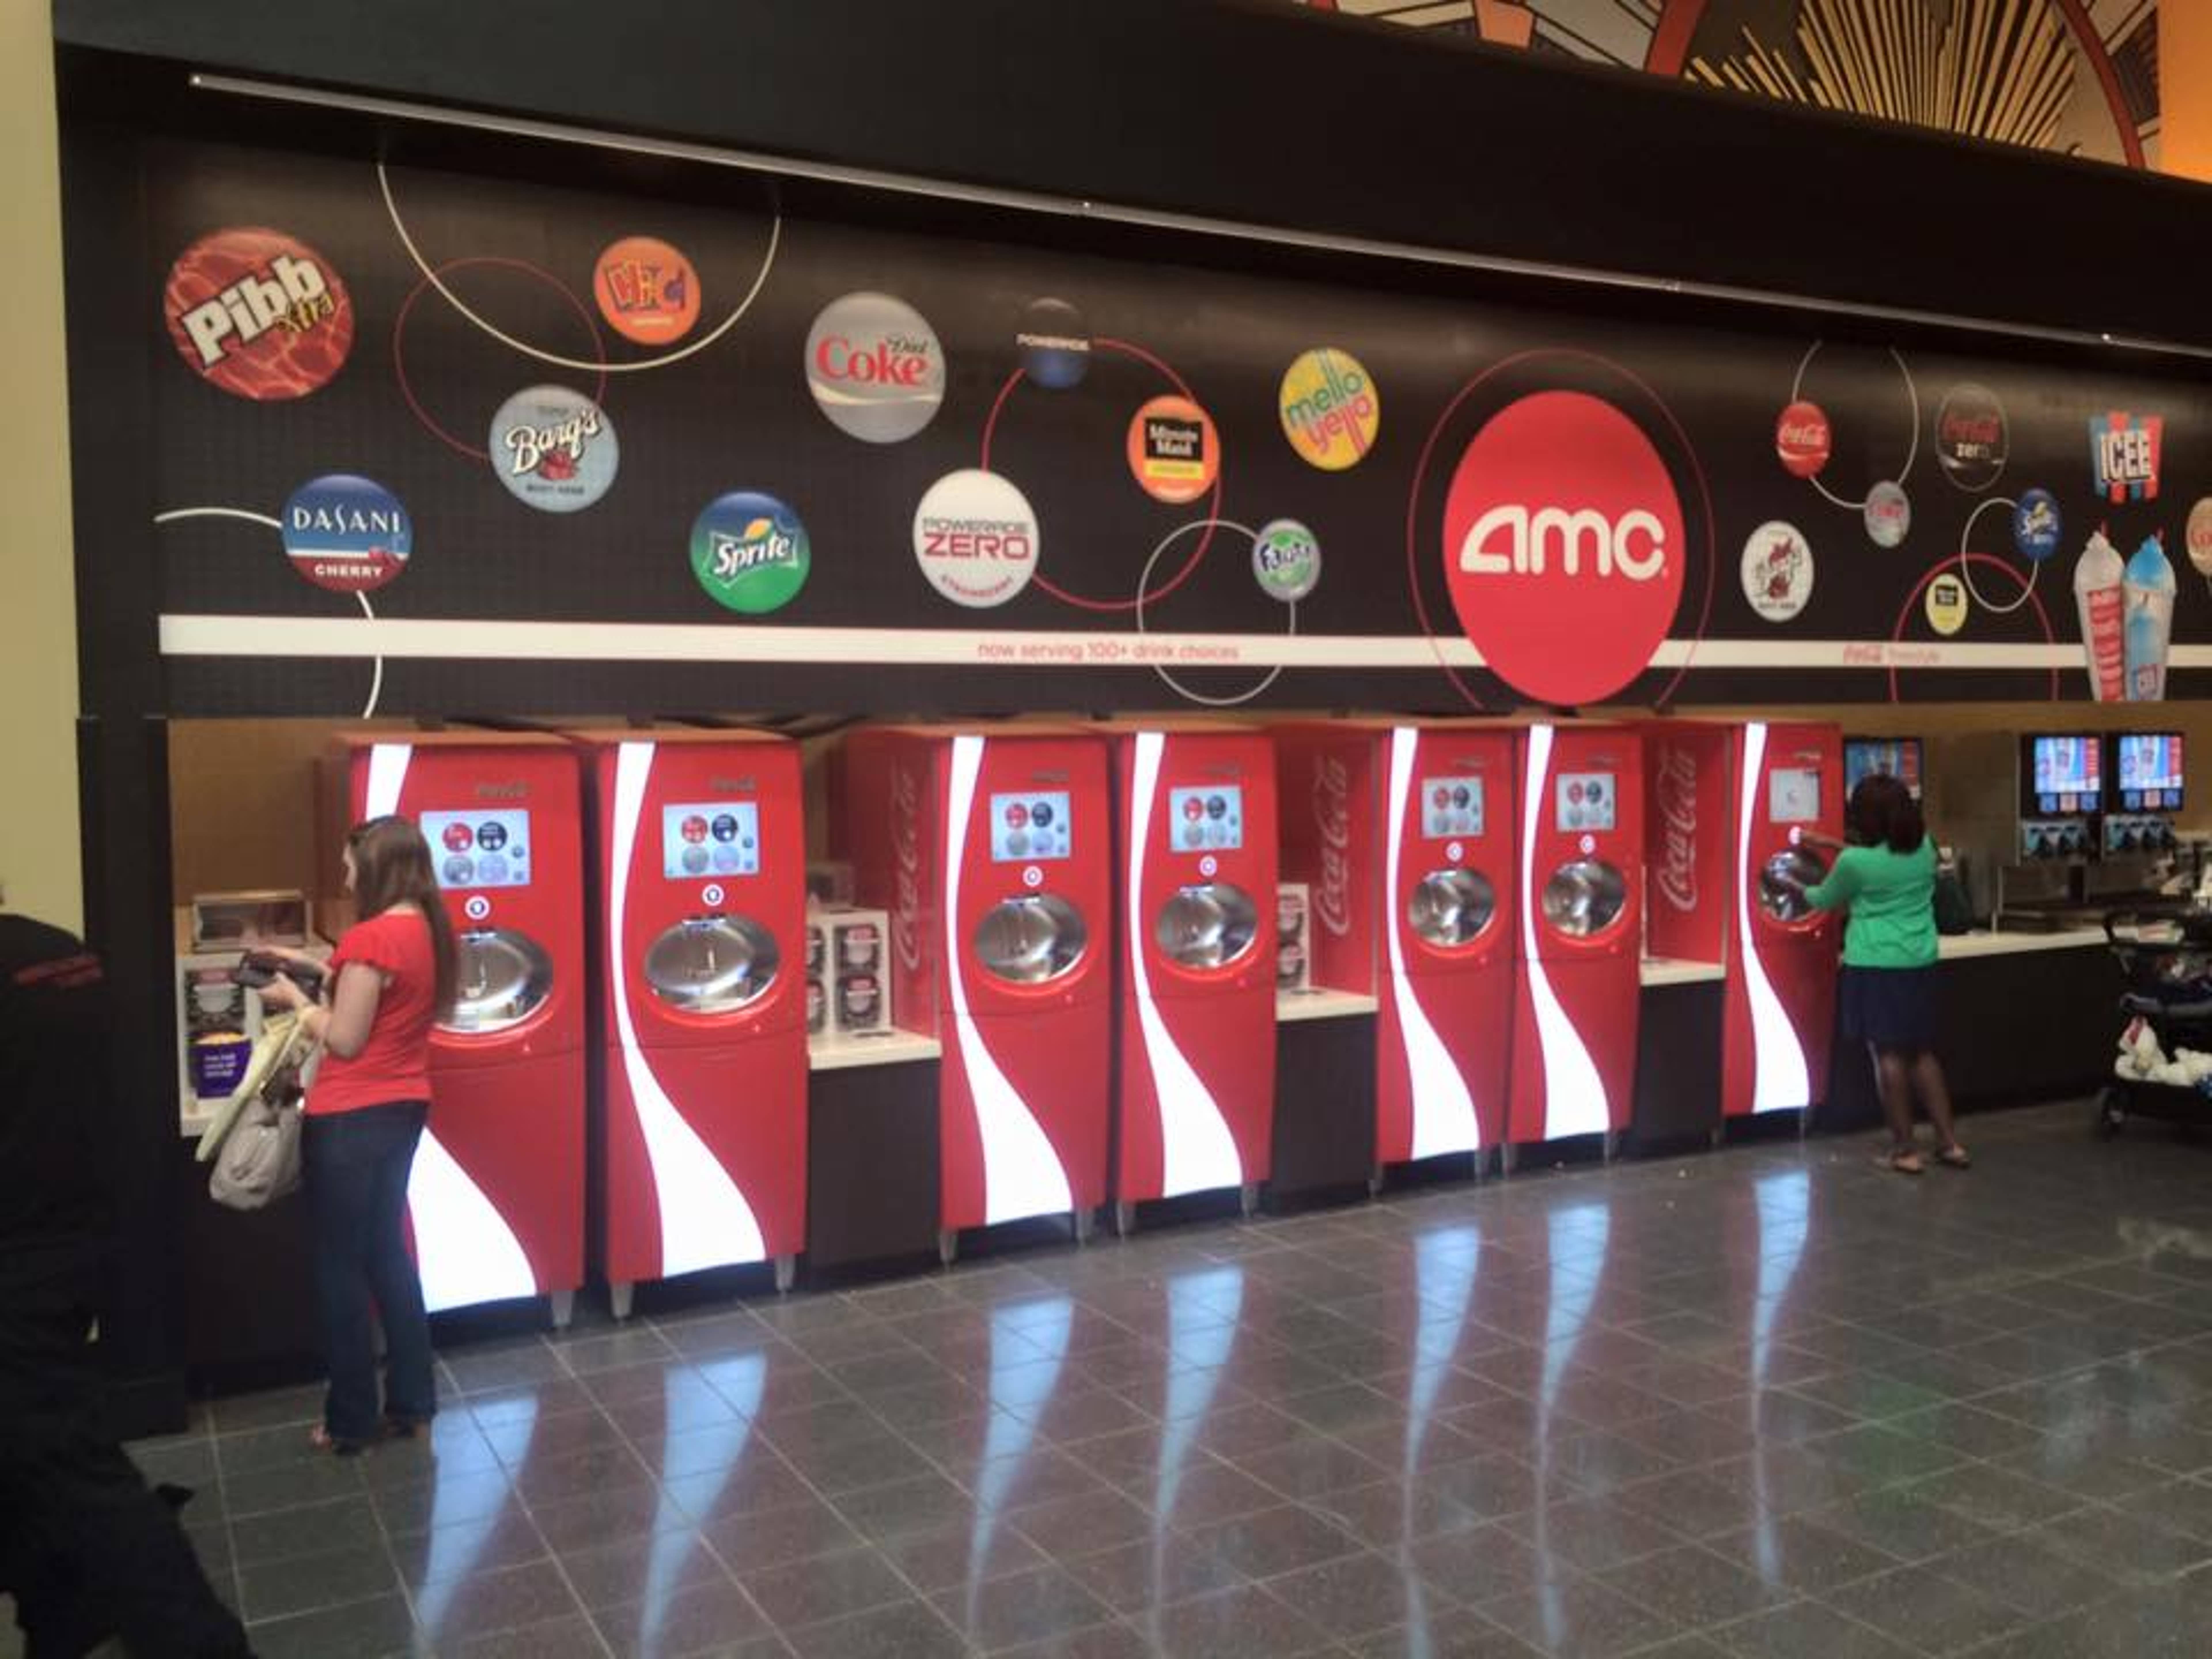 AMC To Raise $70M From Fresh Equity Issue